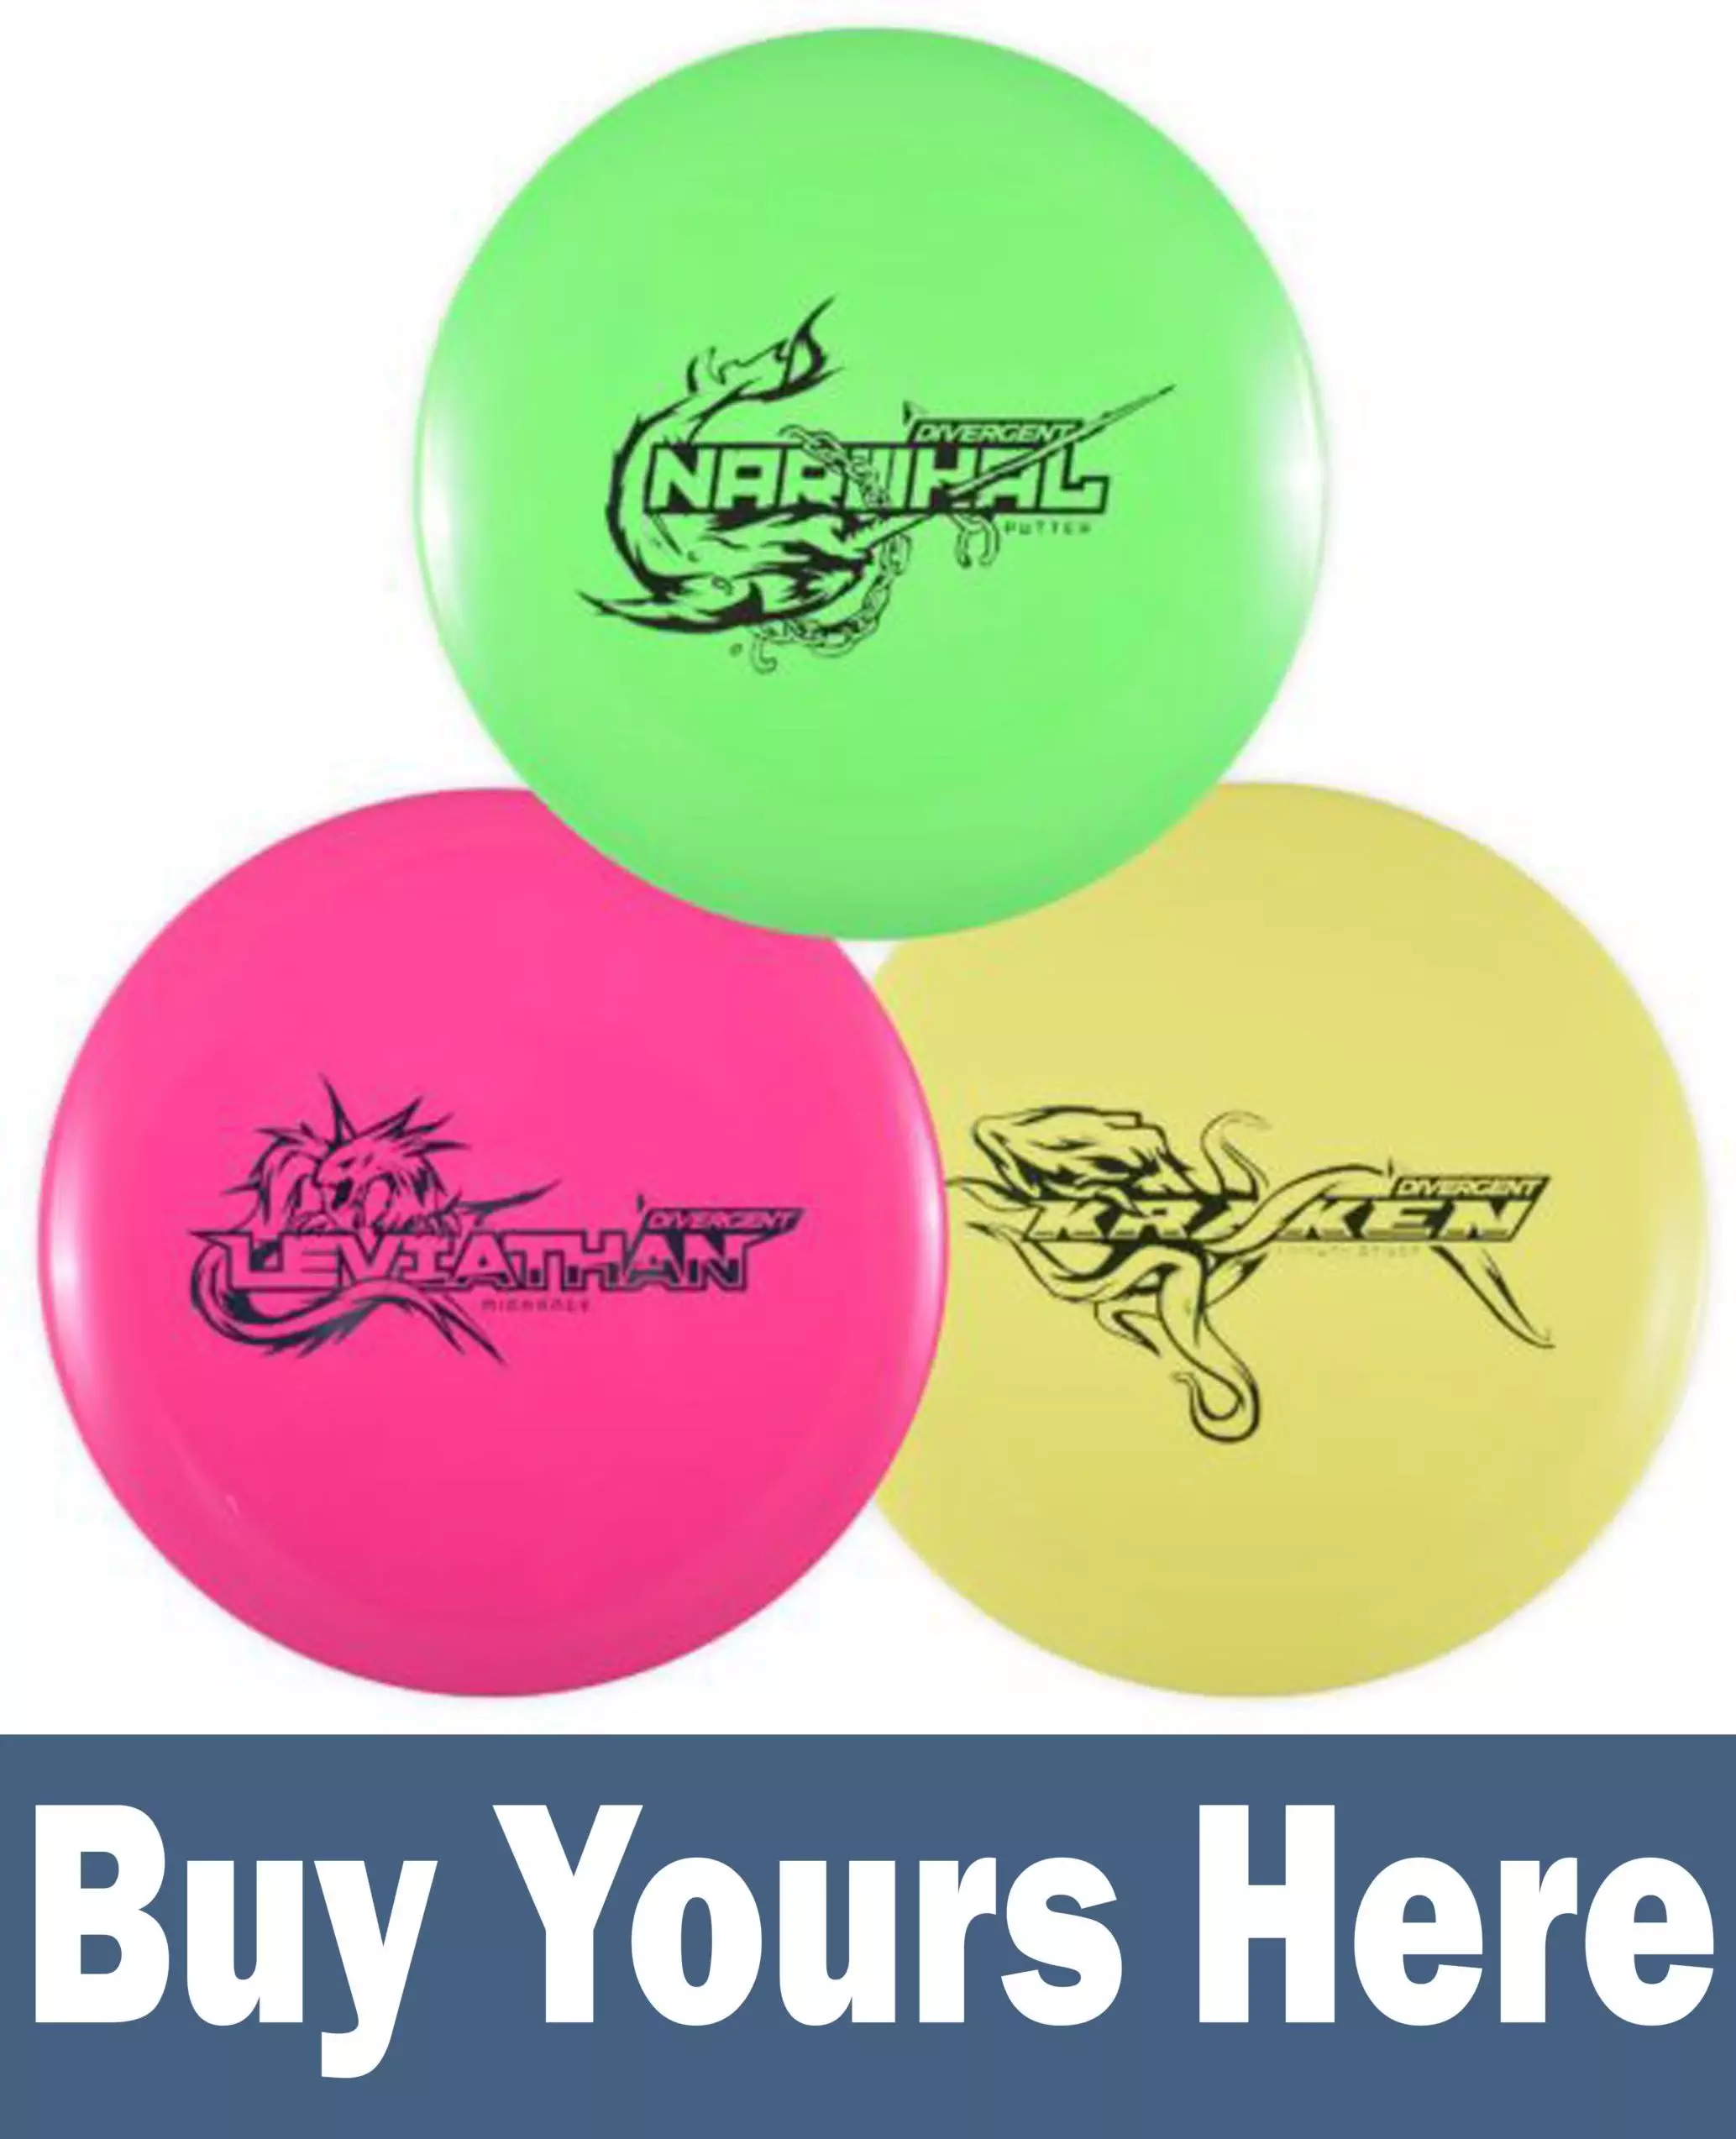 Divergent Discs Max Grip Set Buy Yours scaled e1653419988213 All disc golfers who are just starting to learn the sport will be overwhelmed by the thousands of discs available in the market. It may be hard to choose suitable discs for their needs, especially if they are still starting and unsure of what makes a good beginner disc. One way to ease this issue is to buy the set as detailed in my list of best disc golf sets.. The disc golf set will provide a lot of value and help new disc golfers complete equipment to help develop their game.